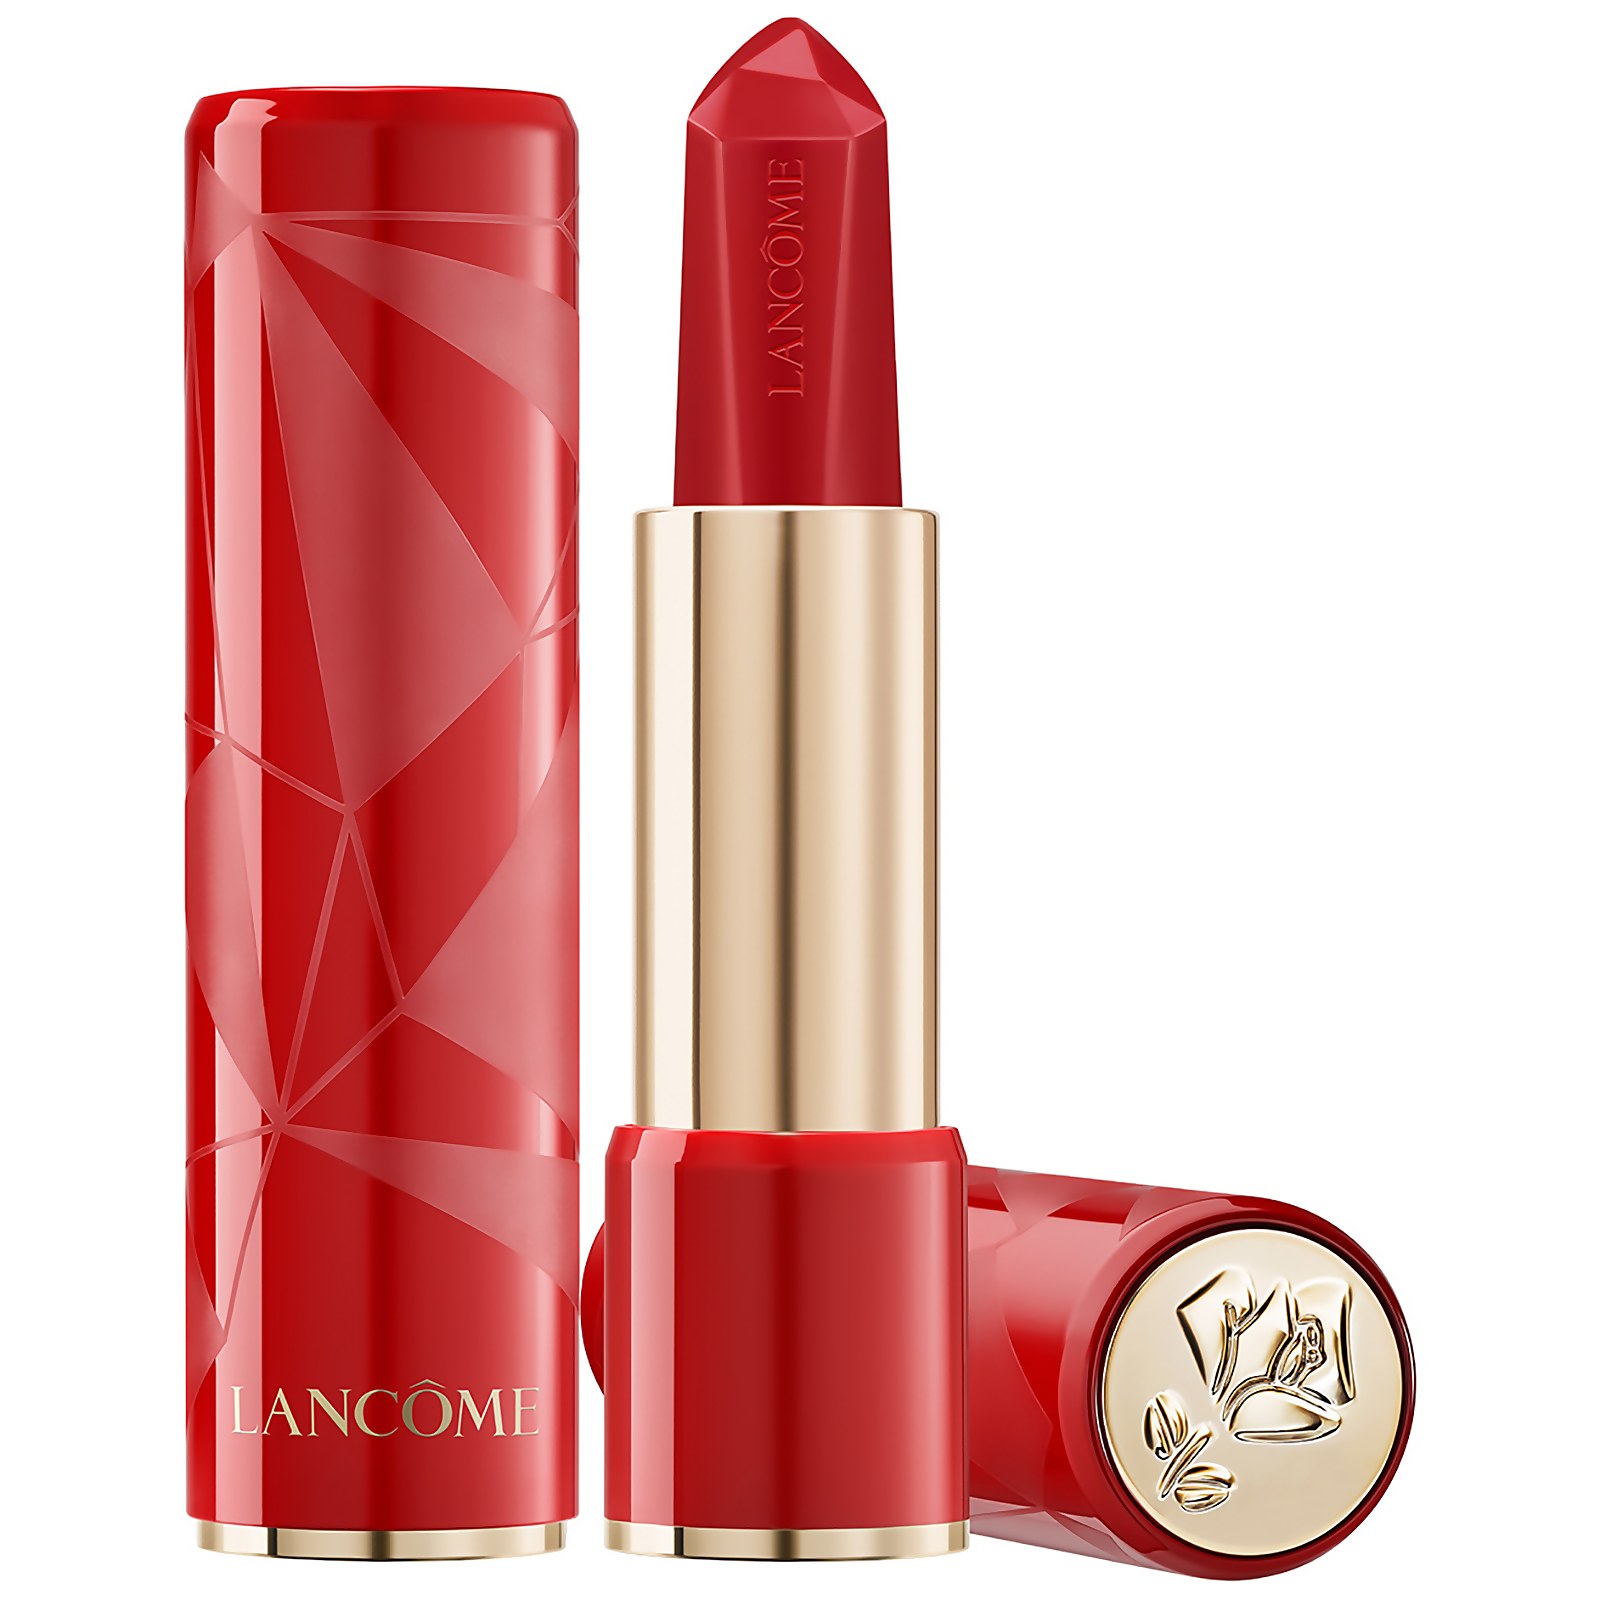 Image of Lancome Absolu Rouge Ruby Cream 3g (Various Shades) - 01 Bad Blood Ruby